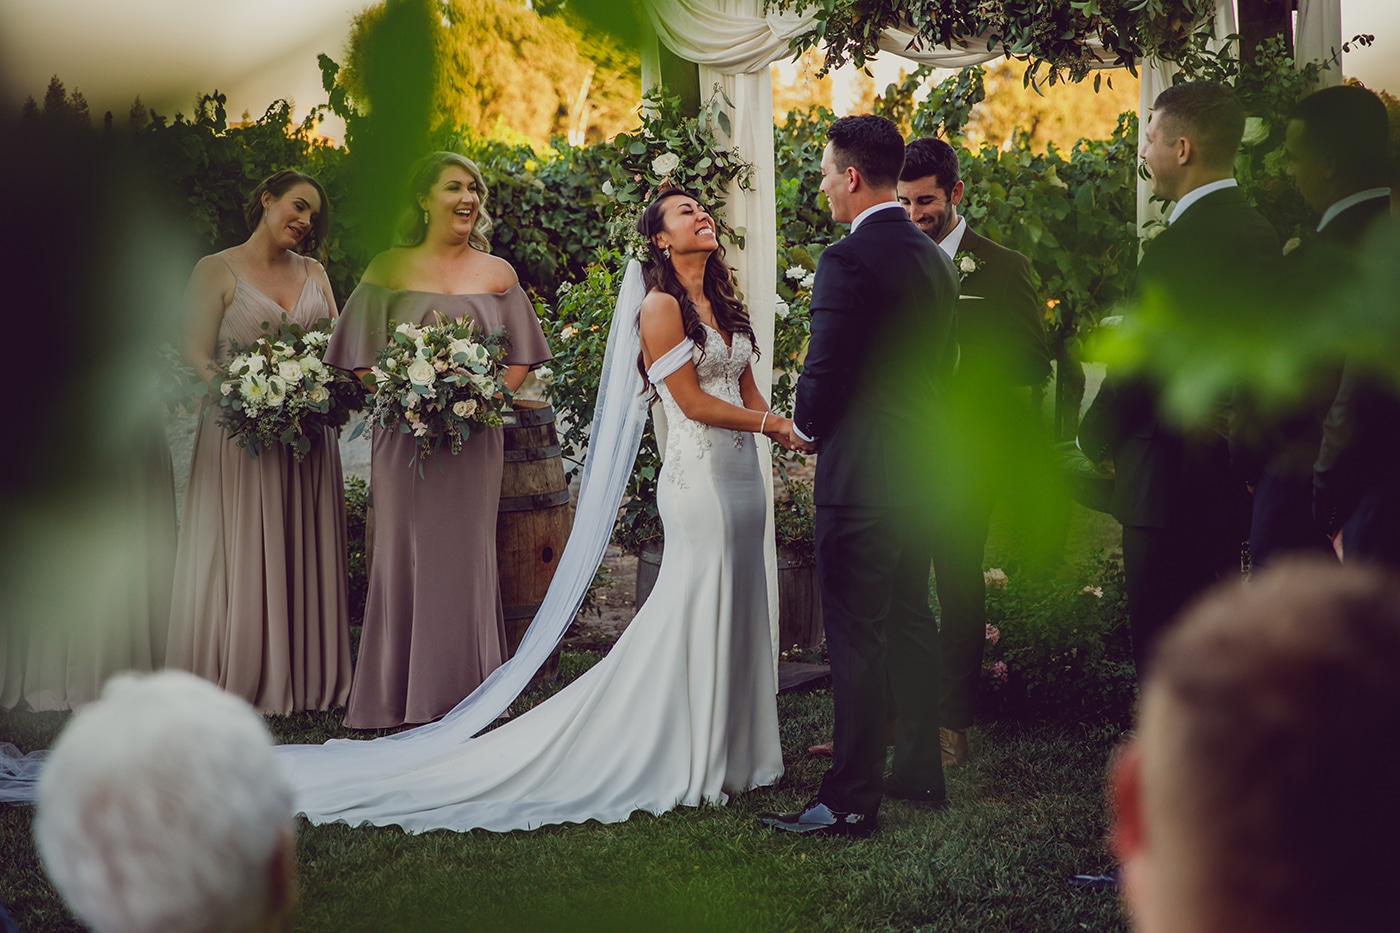 Bride and groom are laughing at the altar of their outdoor wedding, with grape leaves in the foreground.